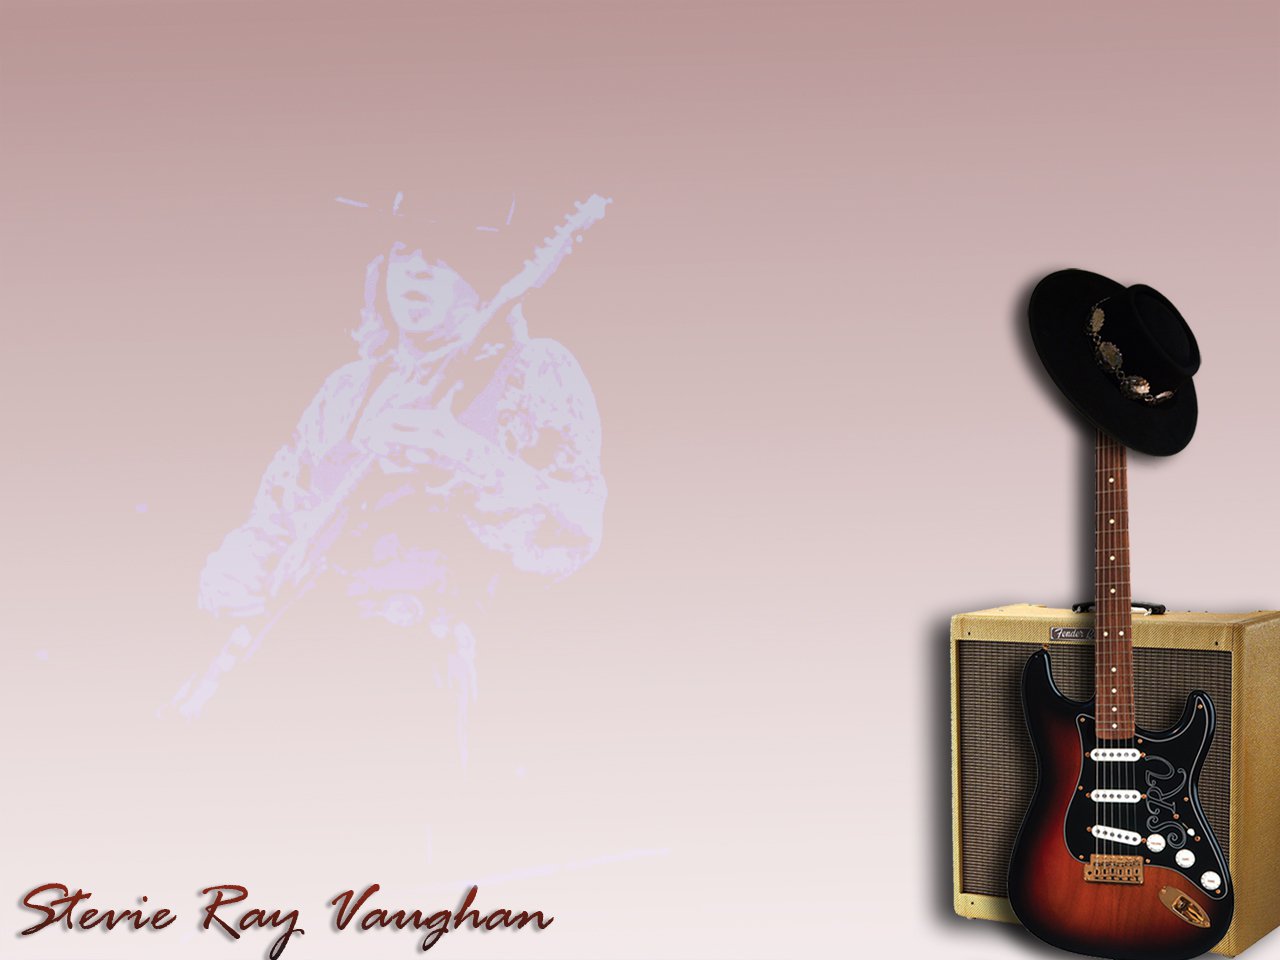 New Srv Wallpaper Finished This Ones For Jesse I Think Lol